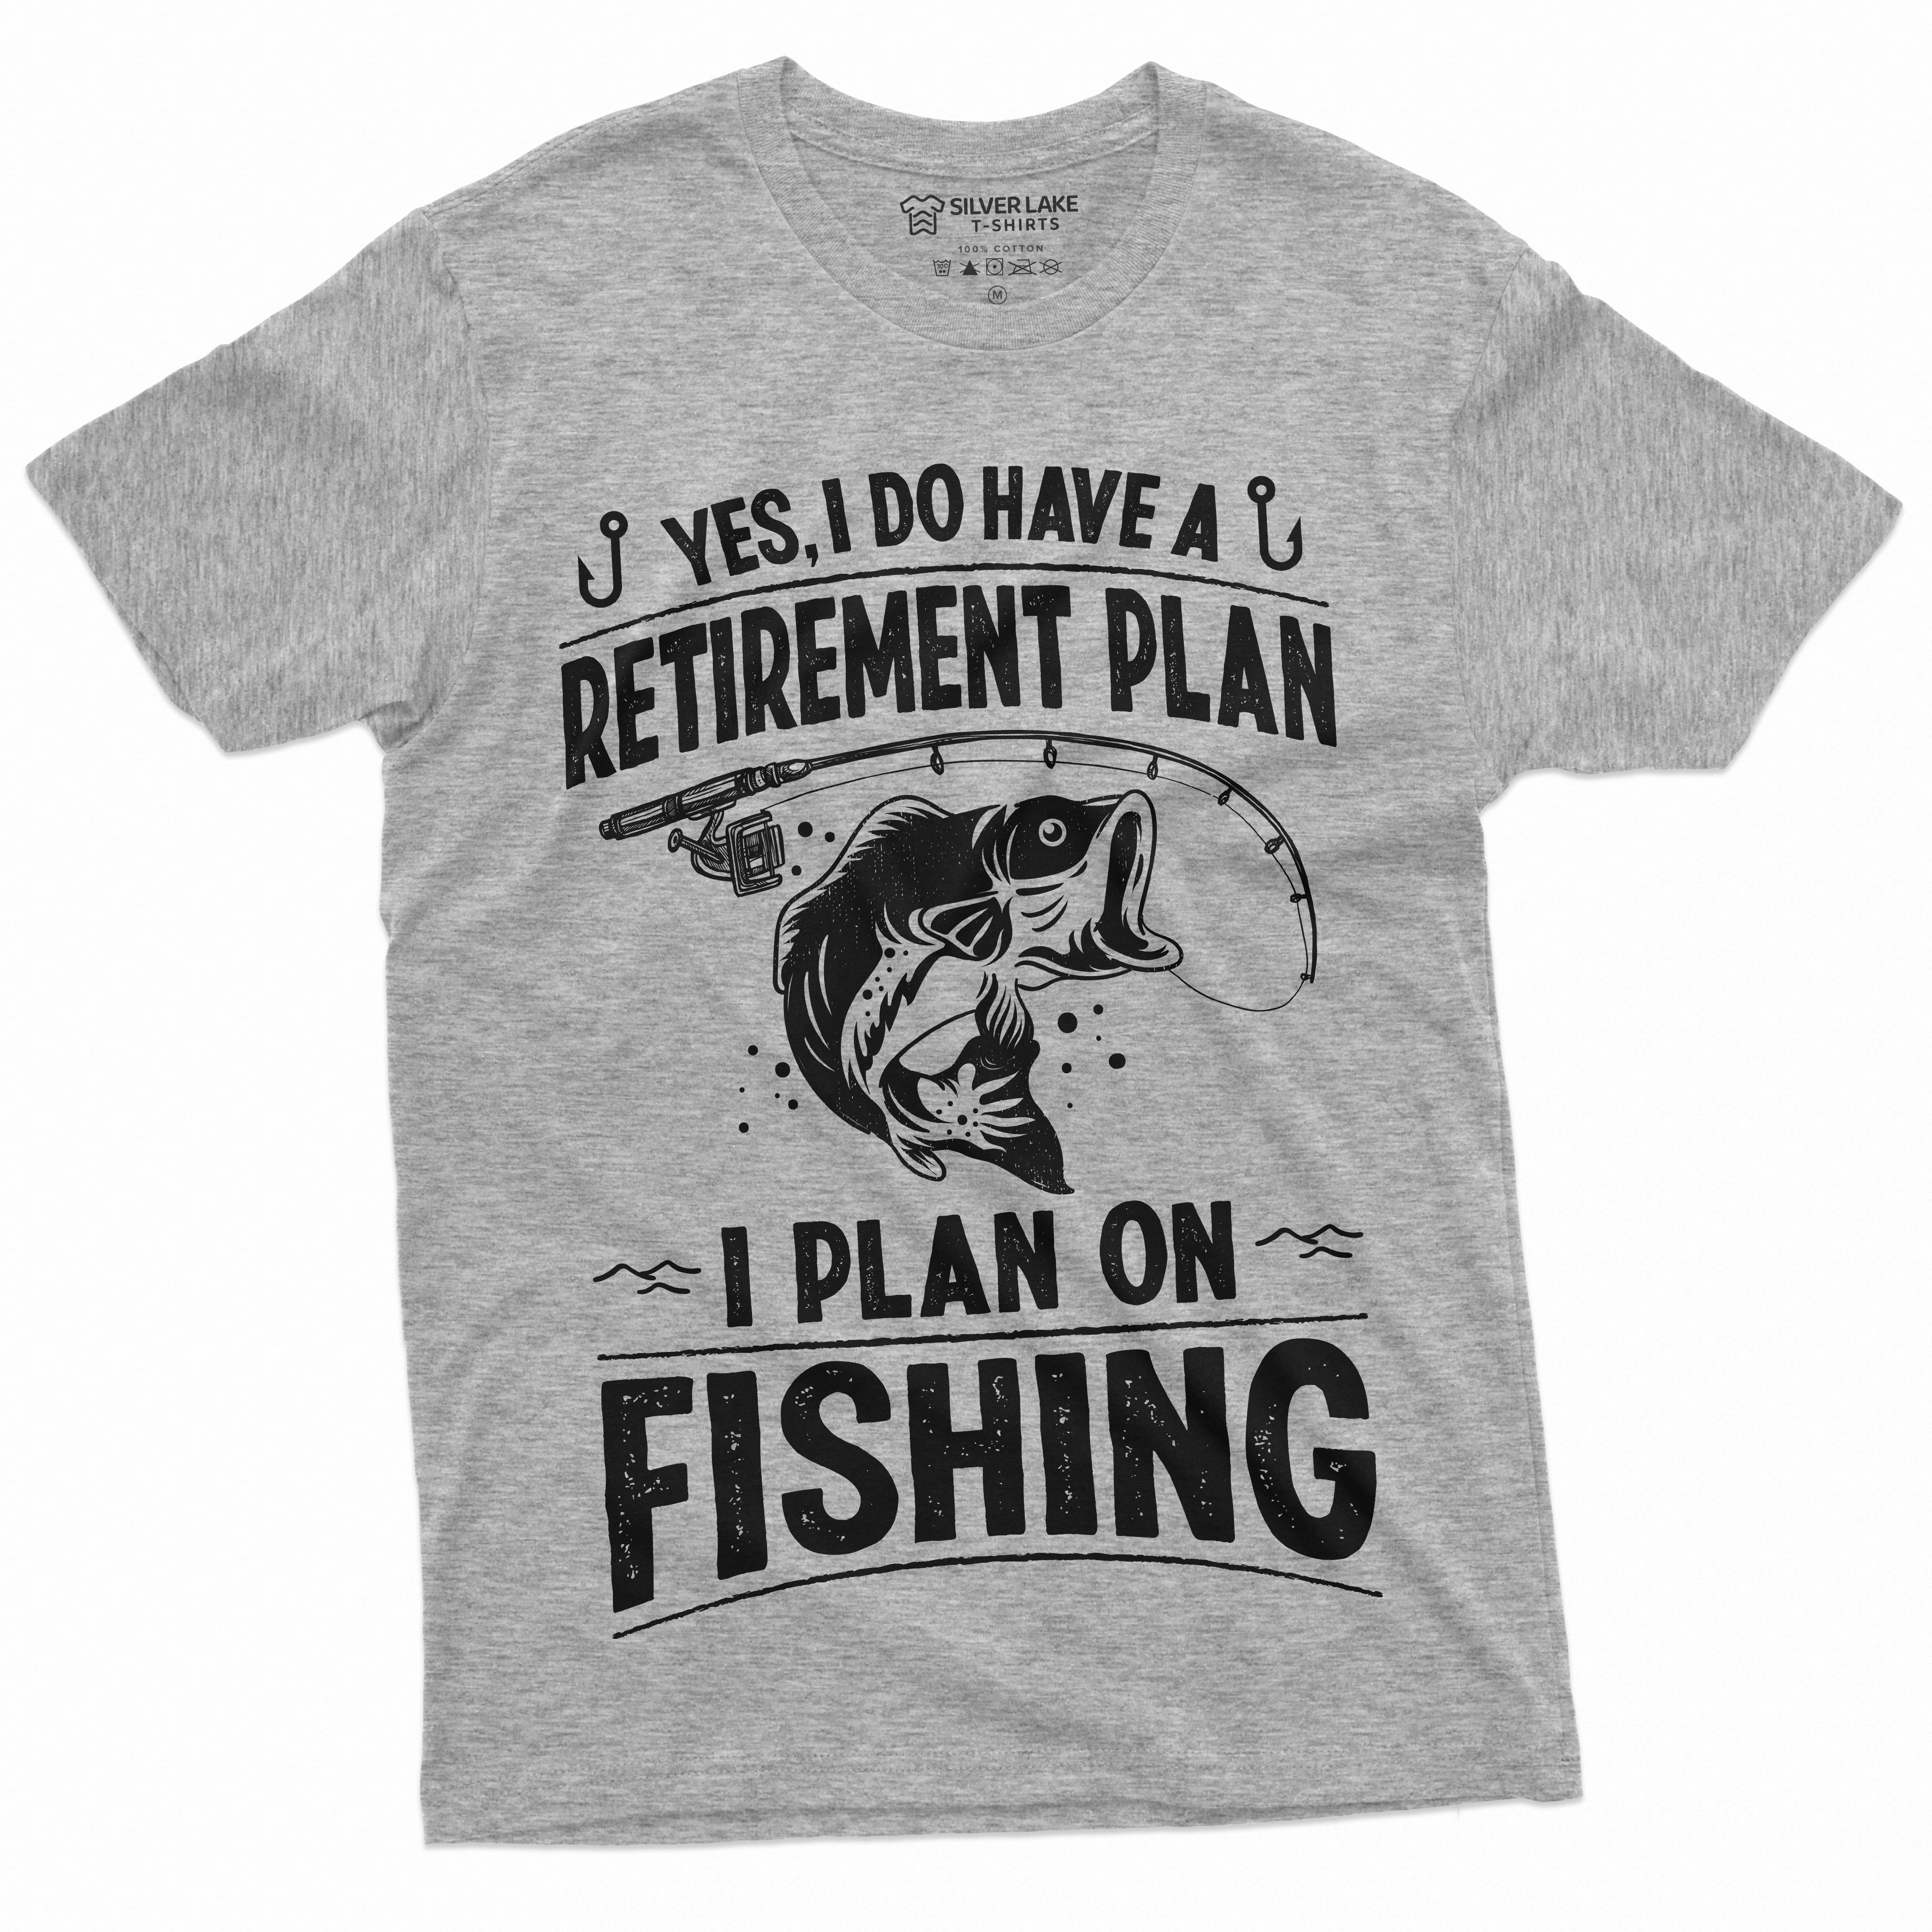 Buy Fresh Fish Funny Fishing Shirt Graphic Fish T-Shirt for Men, Packed  Like a Fish Wrap Ready, Father's Day Grandpa Gifts at